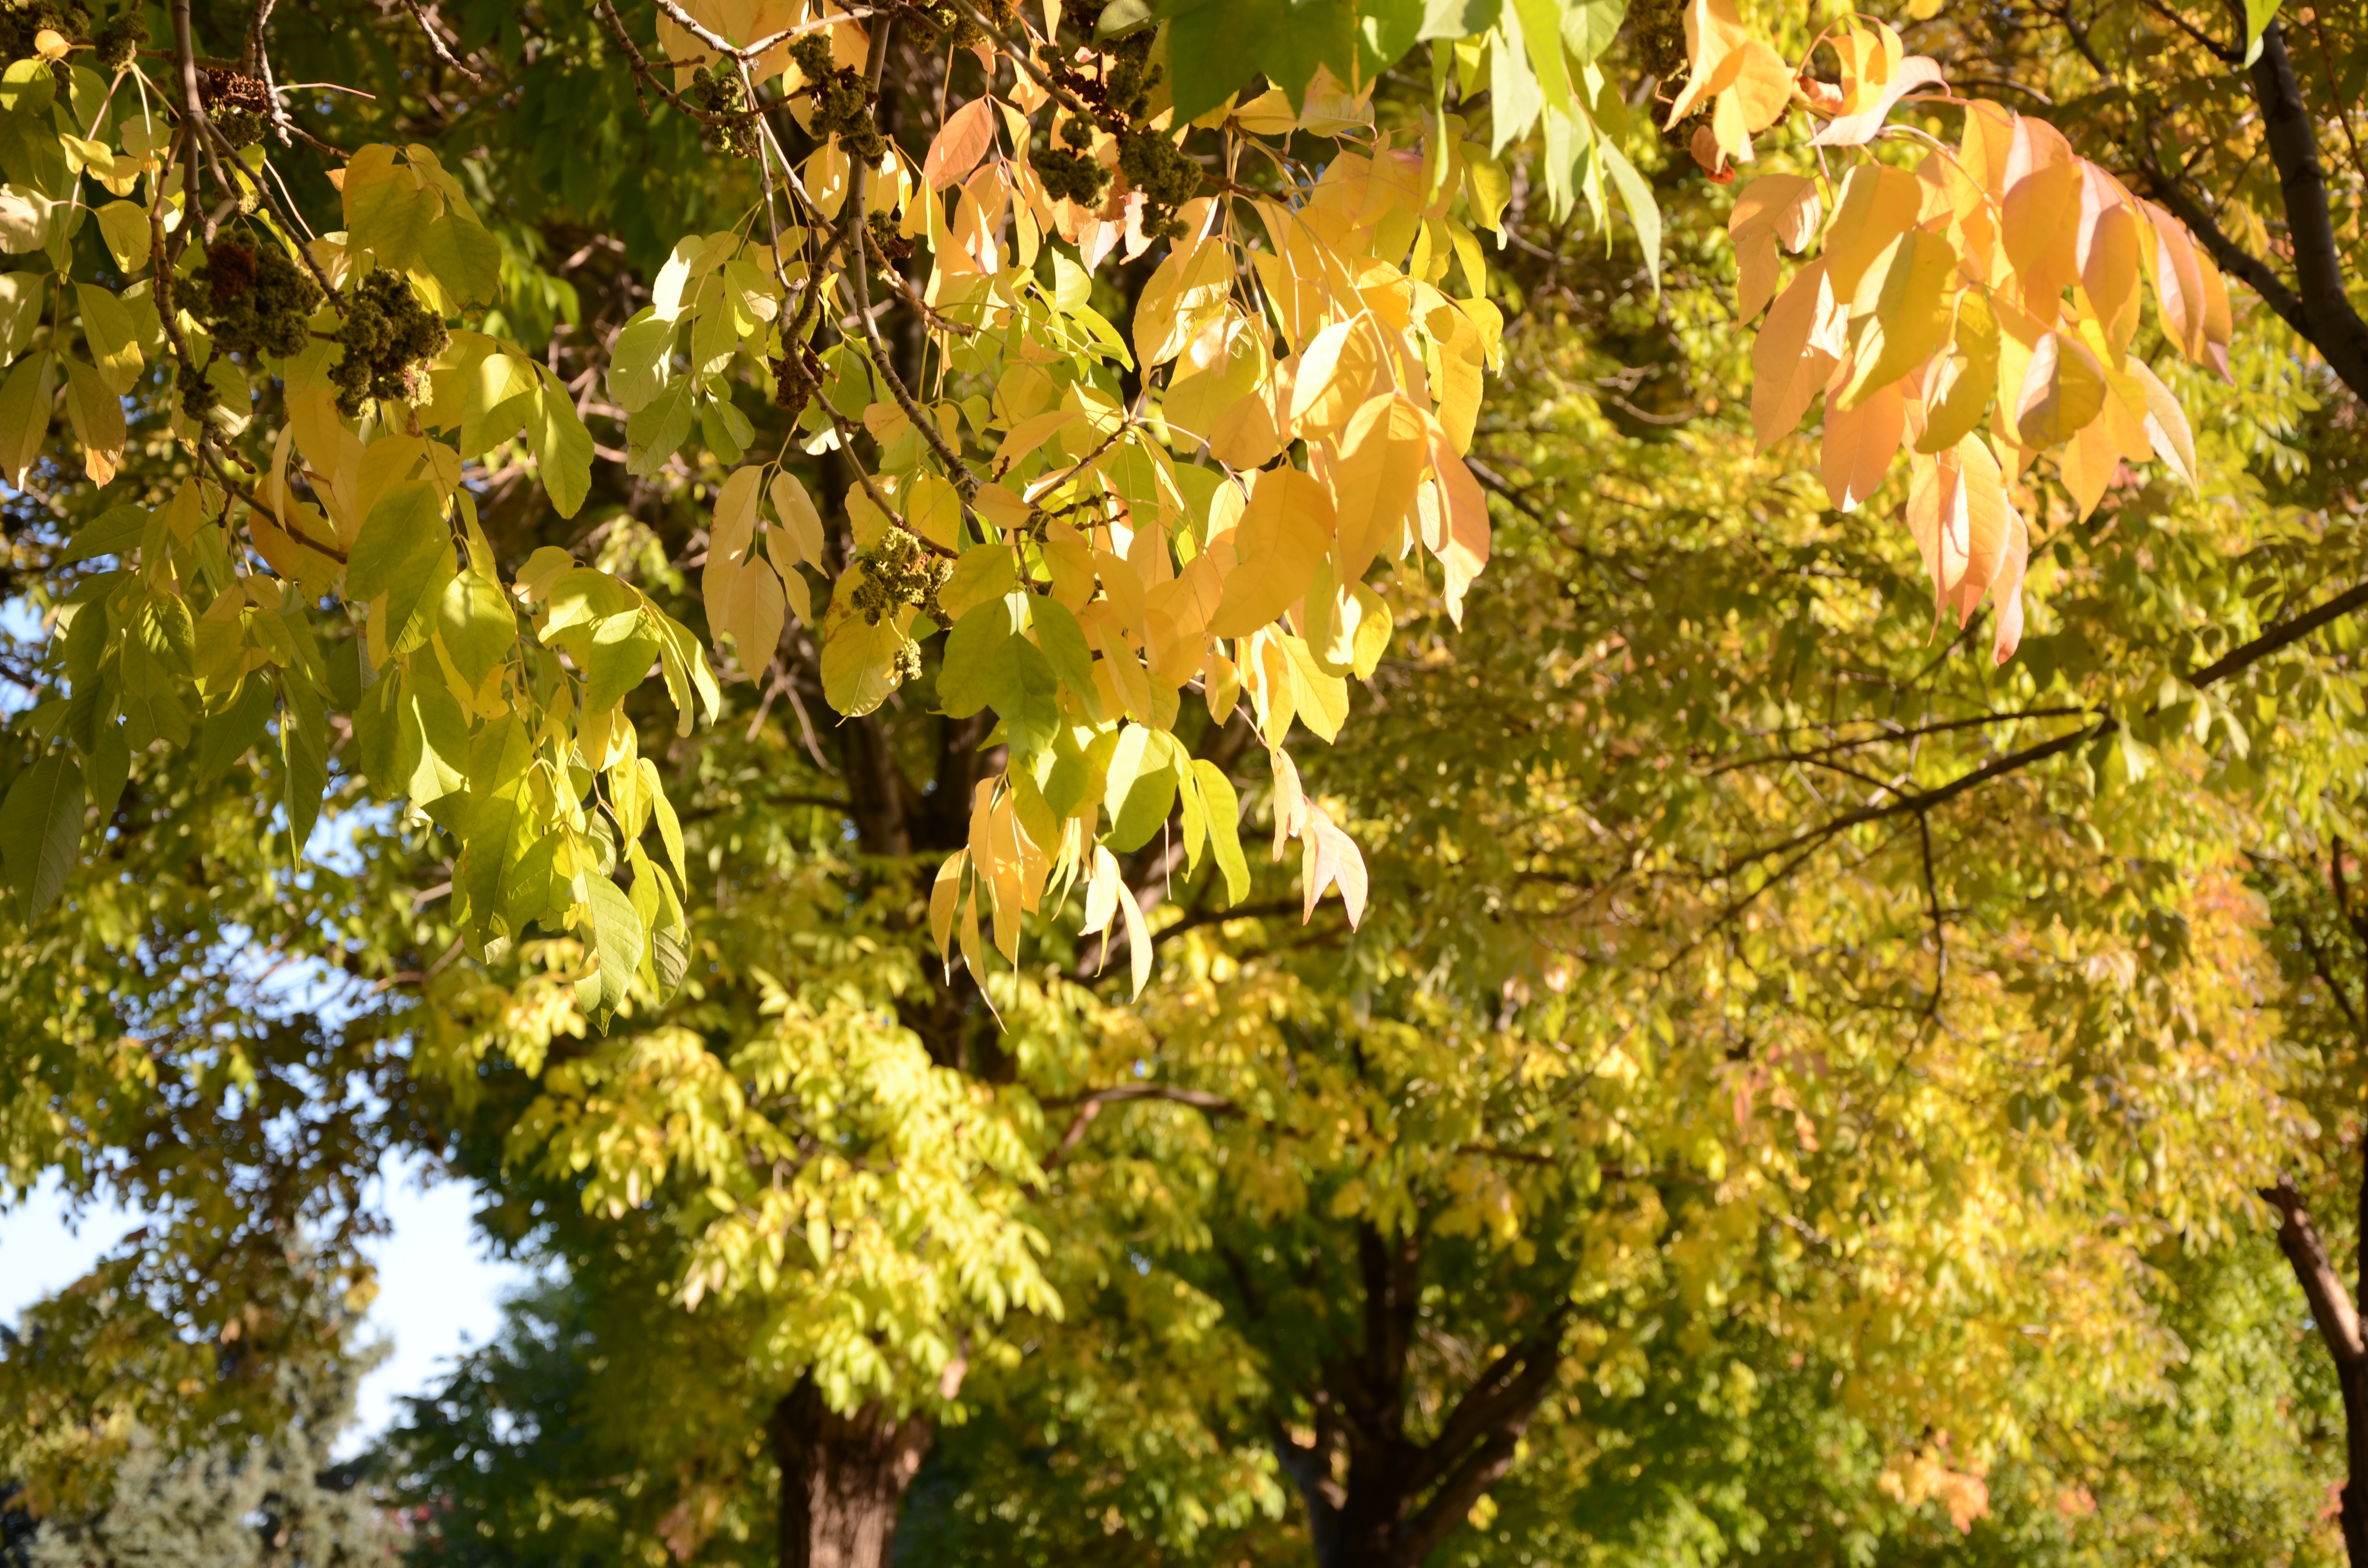 While enjoying Denver's fall color, appreciate our ashes | Be A Smart Ash